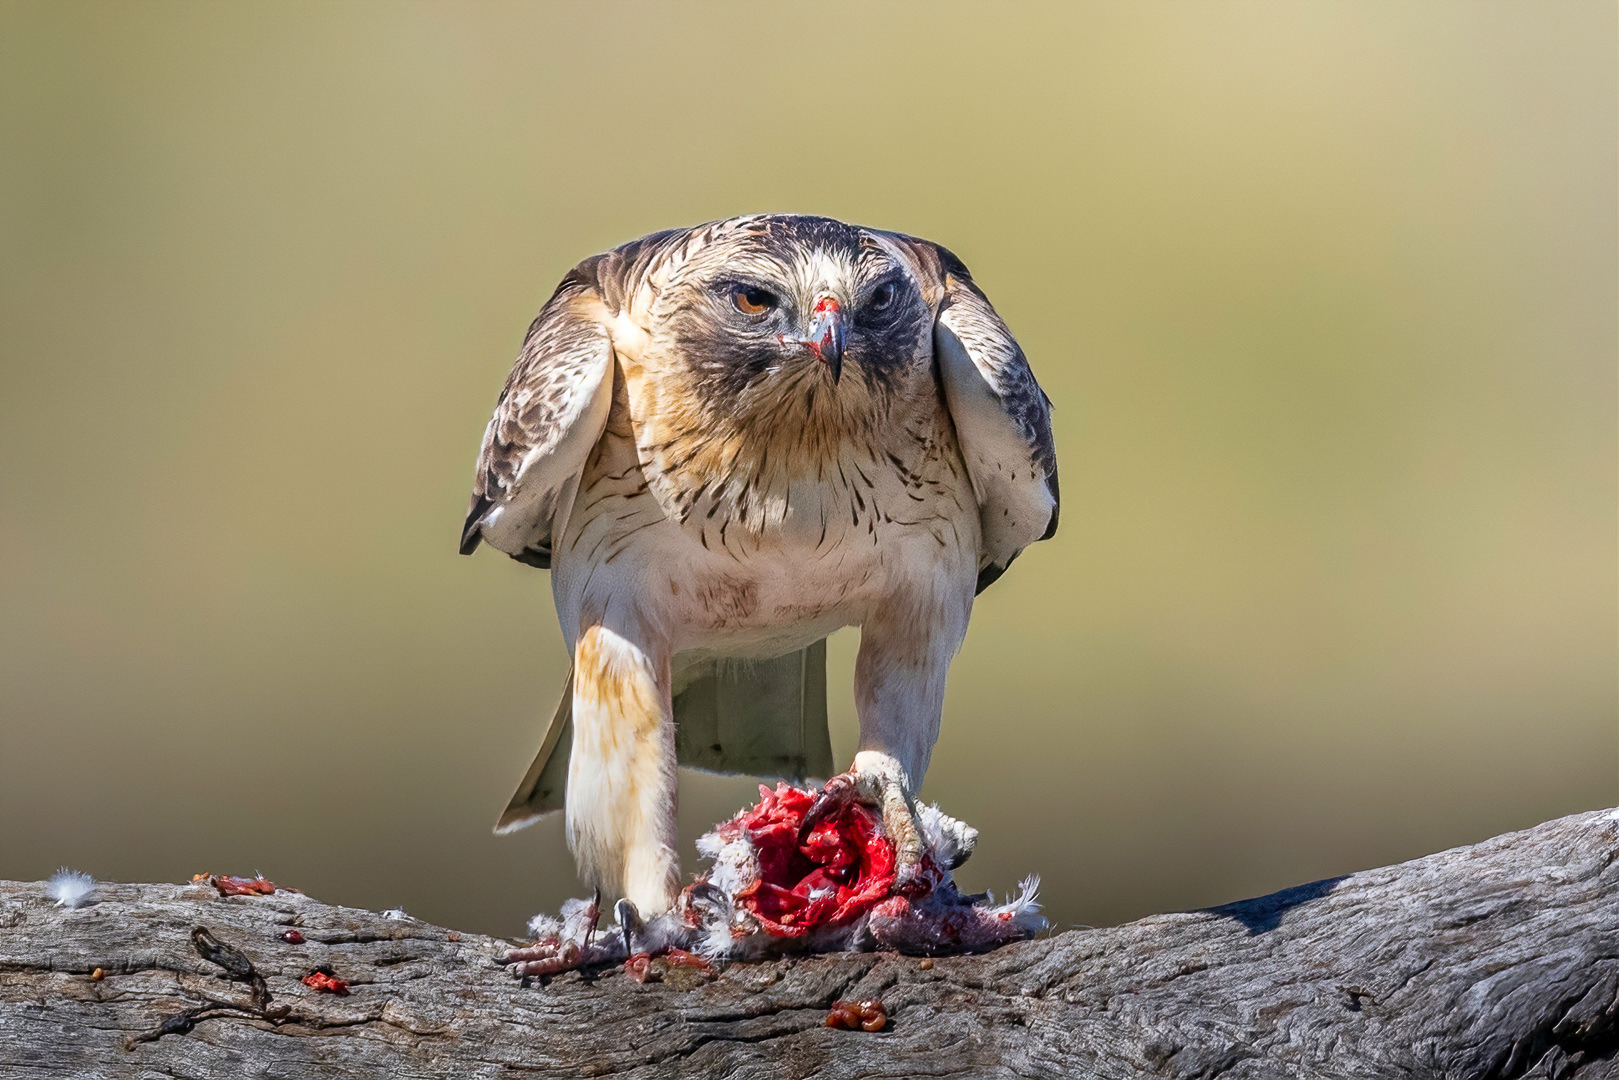 Little Eagle Blood and Guts by Wade Buchan